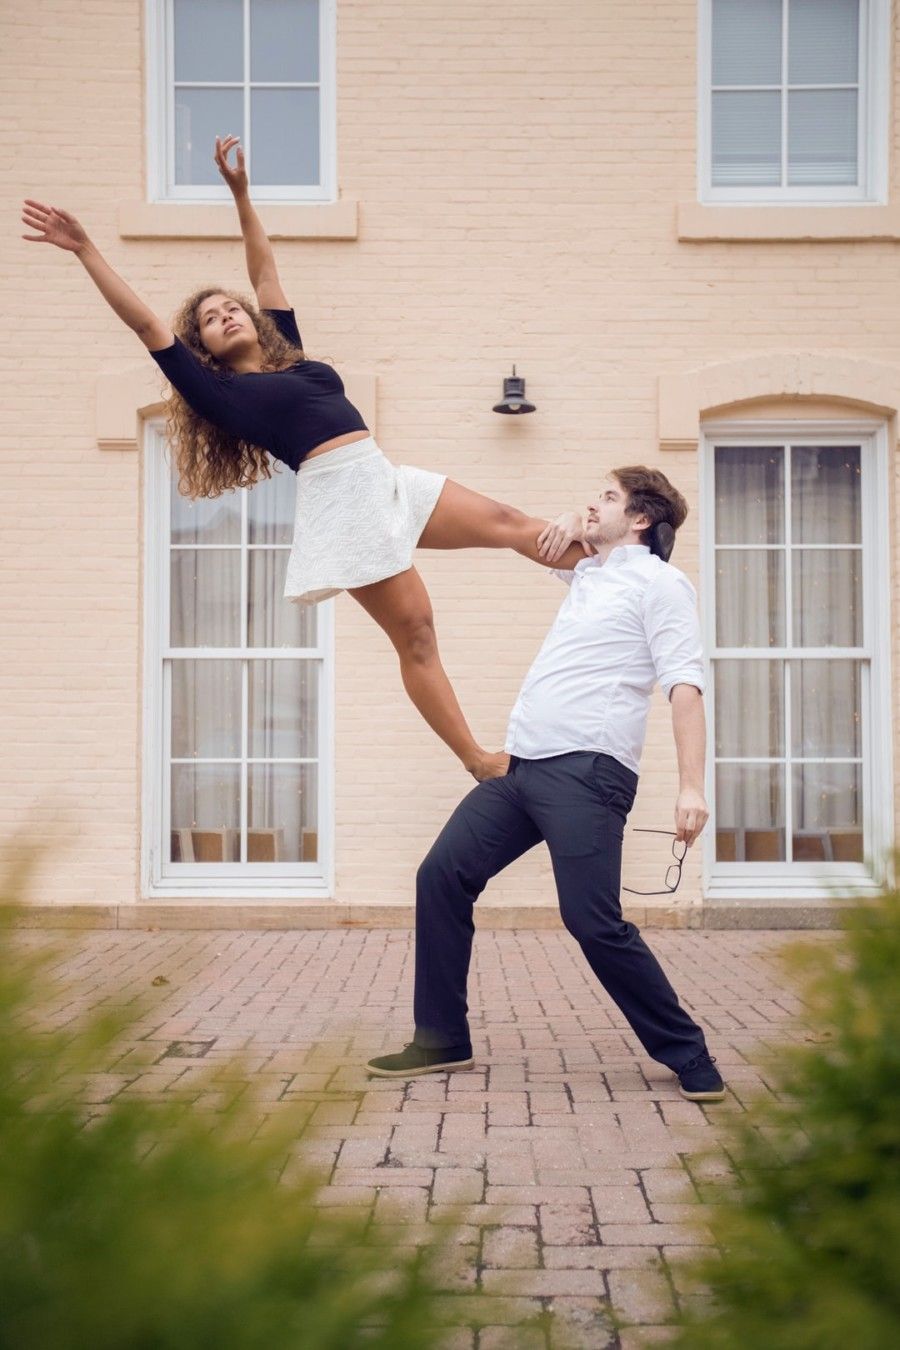 woman-stepping-on-man-while-posing-near-building-during-daytime